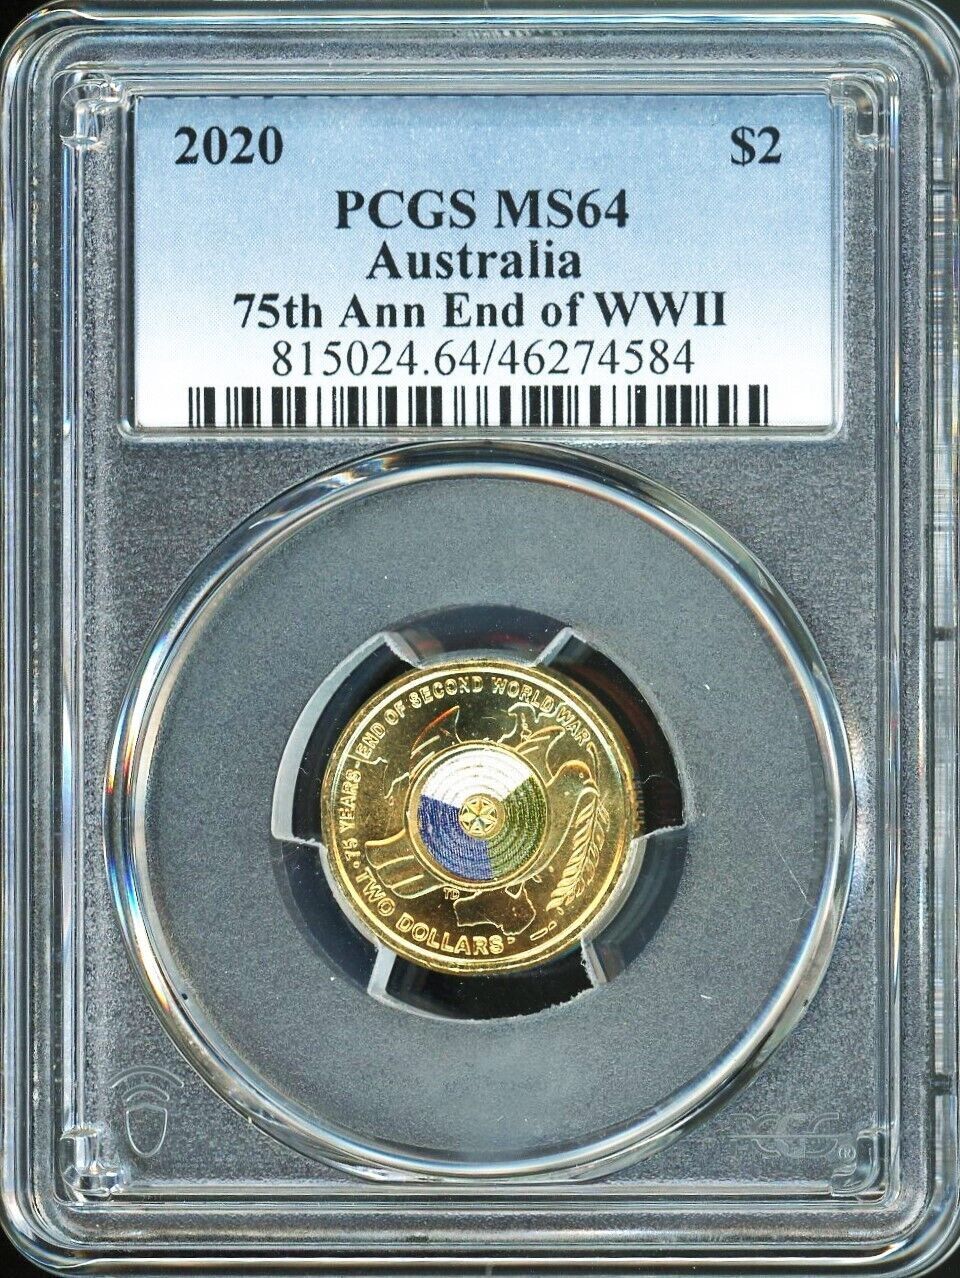 2020 Australian $2 75th Anniversary End of WW2 PCGS MS64 Coin